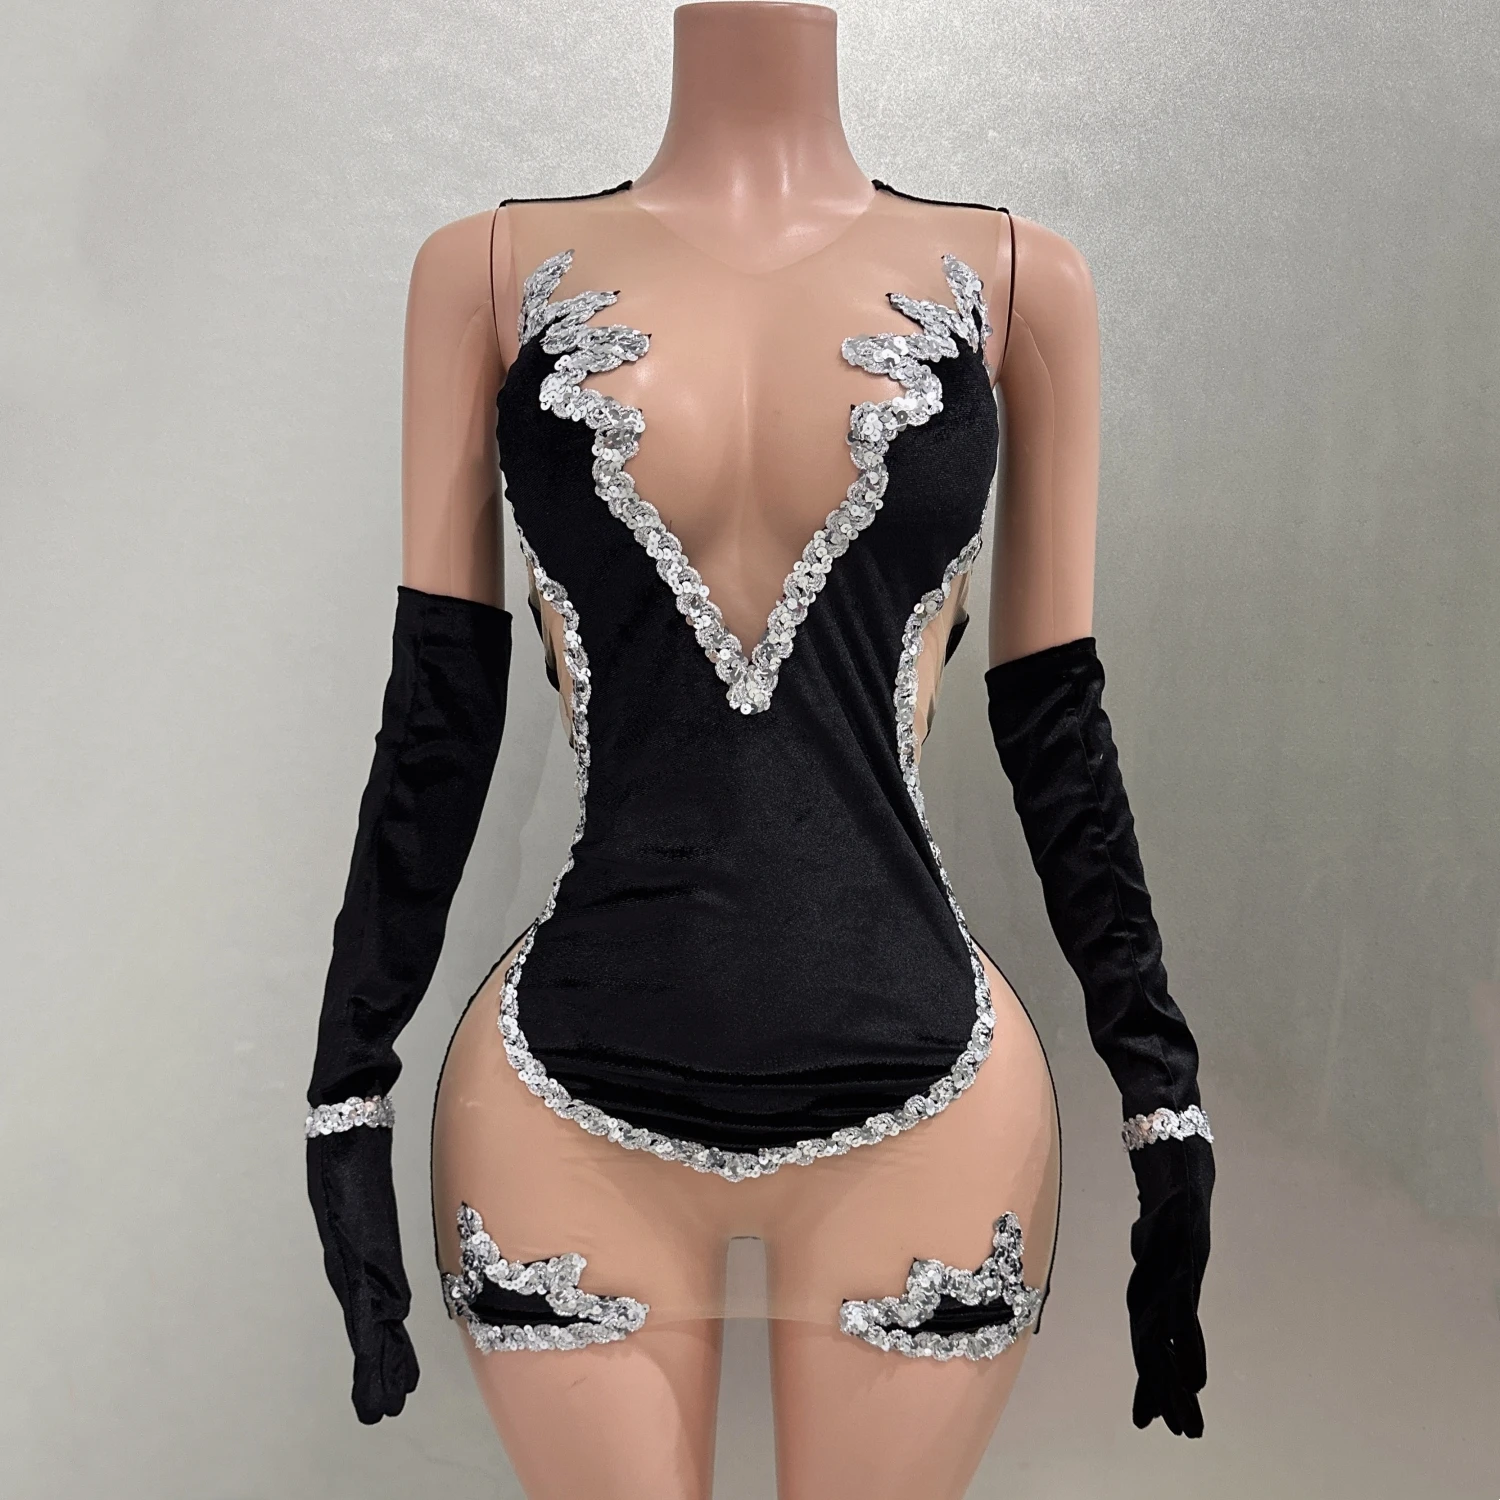 

Black Velet With Gloves Sexy See-Through Sheath Mini Dress Evening Party Nightclub Performance Costume Bar Singer Stage Wear